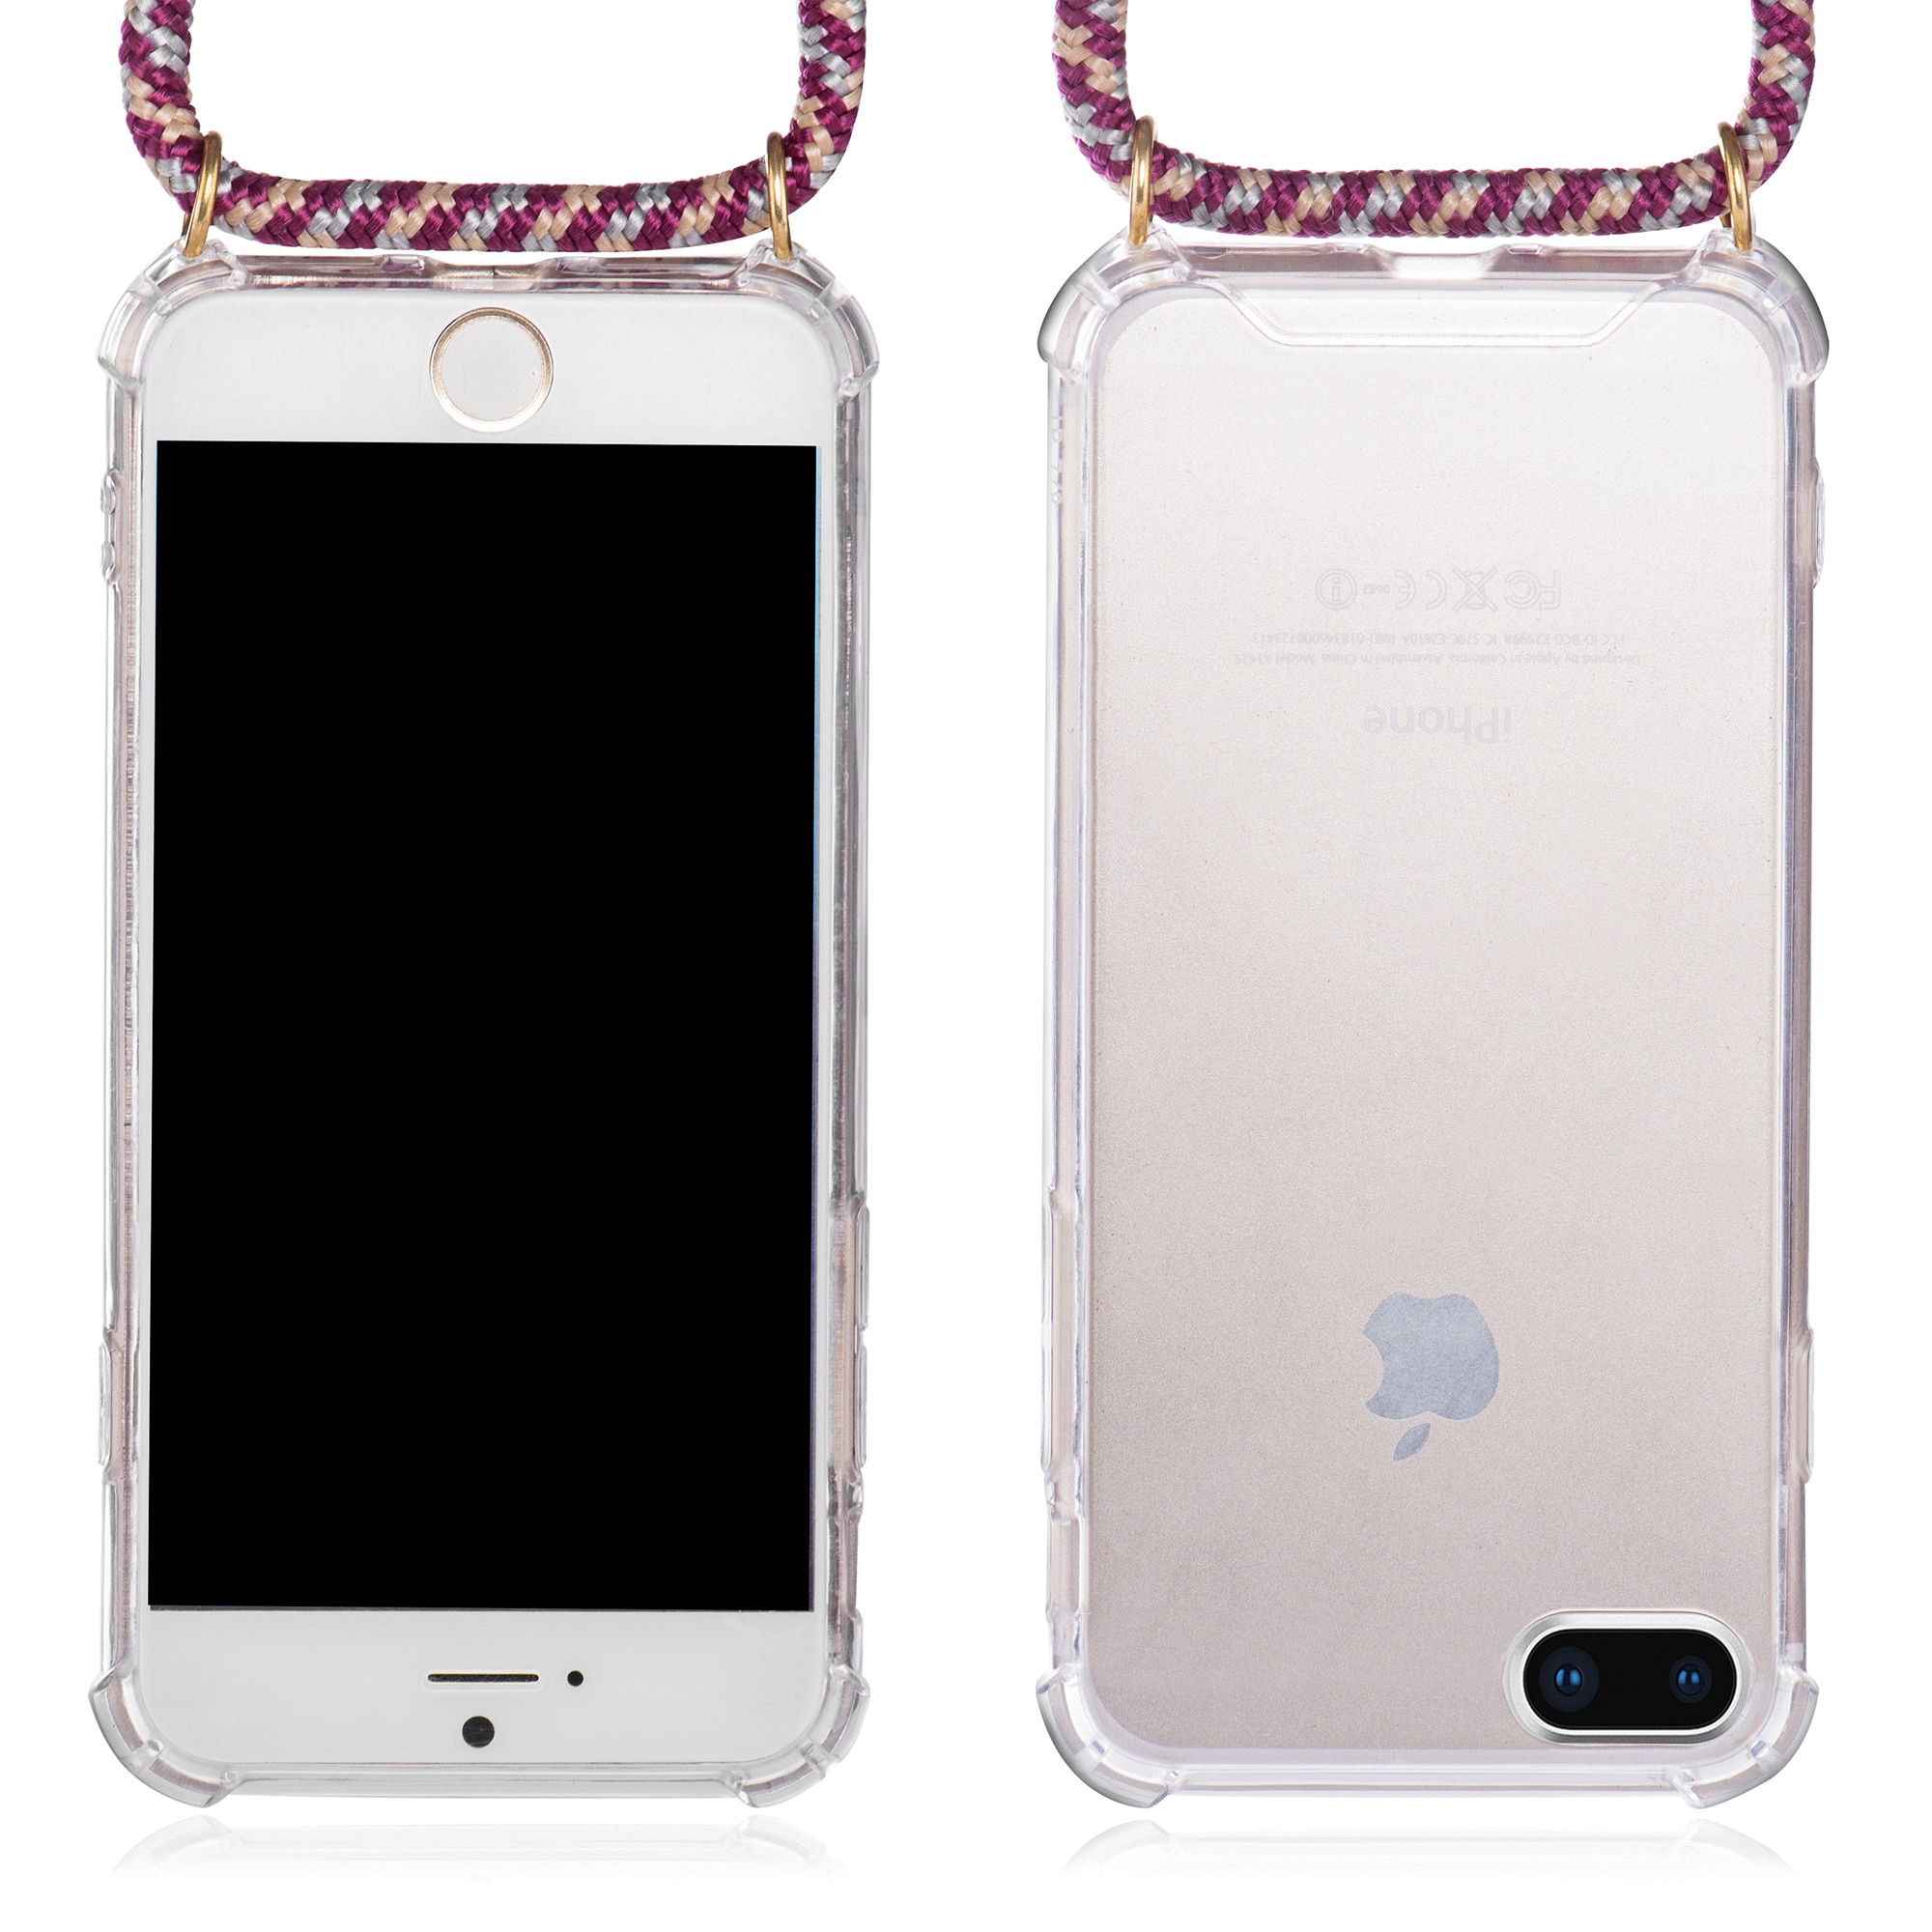 Necklace Cases iPhone 14 with detachable cord | Change